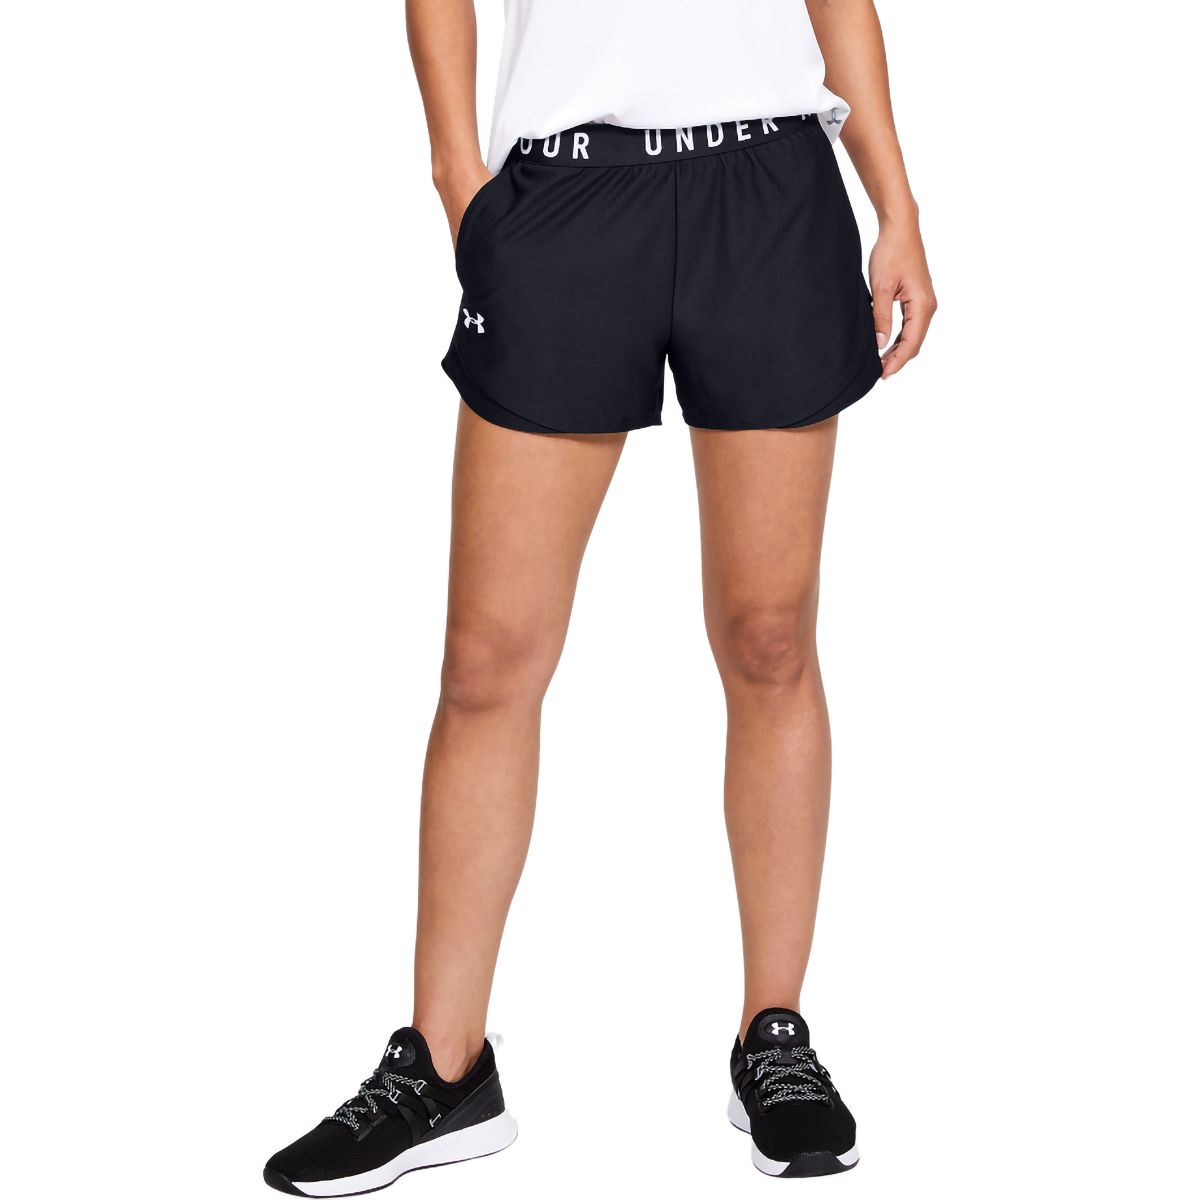 Under Armour Short - Women's - Clothing